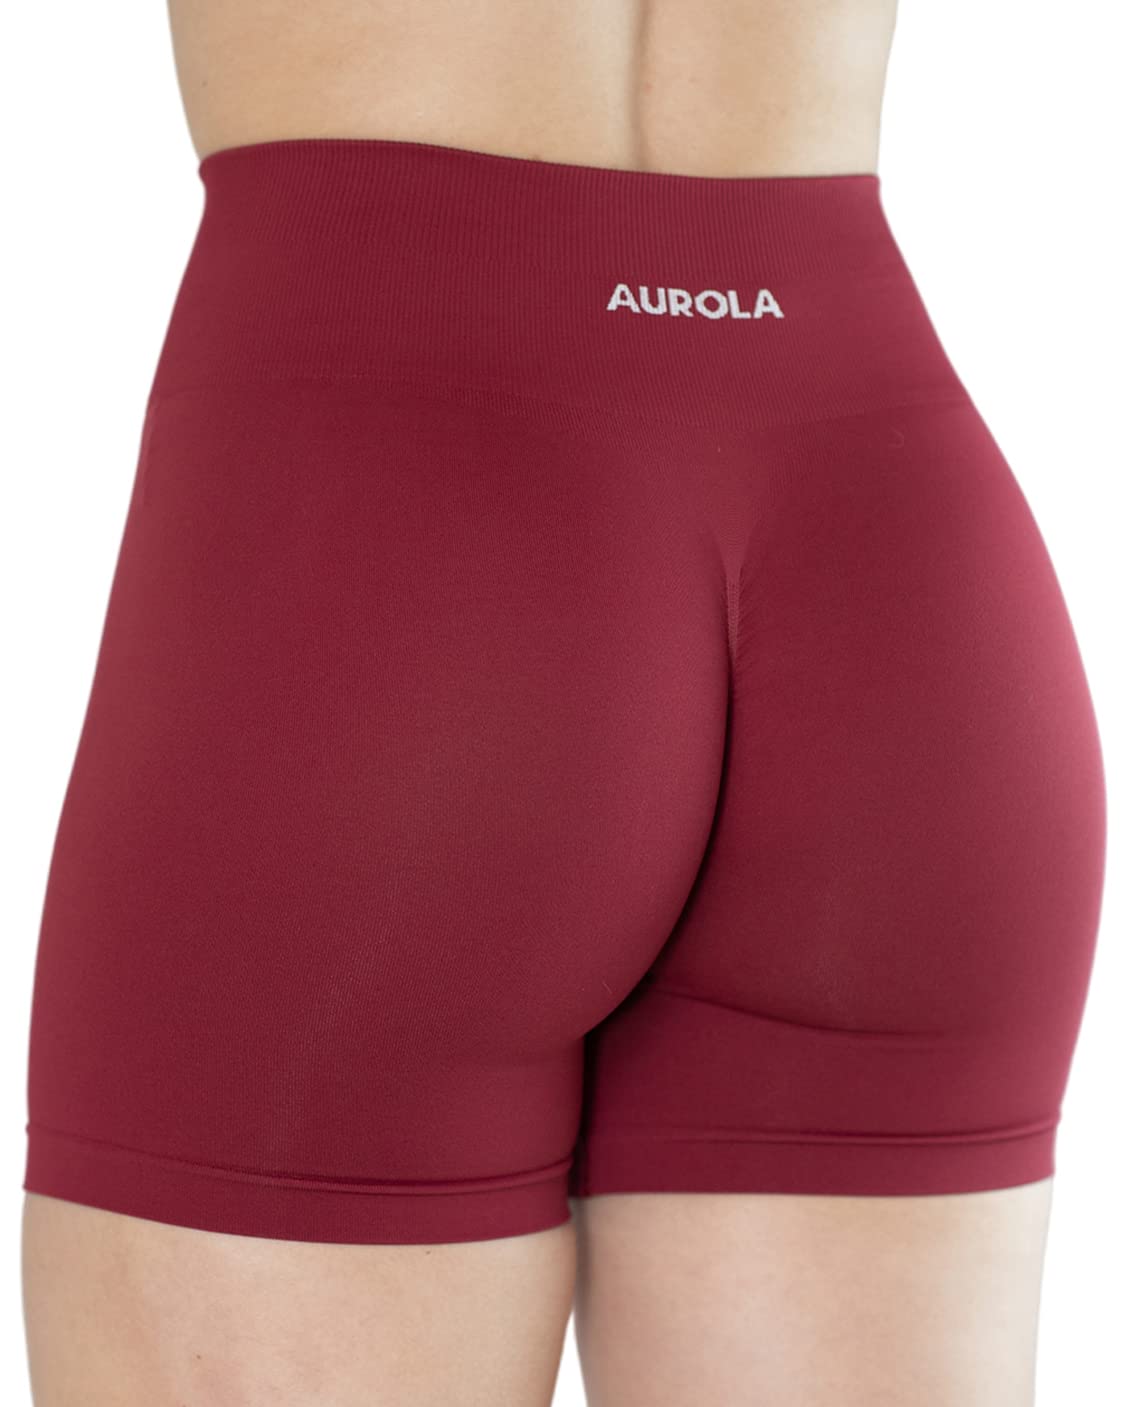 Buy AUROLA Intensify Workout Shorts Sets for Women Seamless Scrunch Gym  Yoga Sport Active Exercise Fitness Shorts Packs